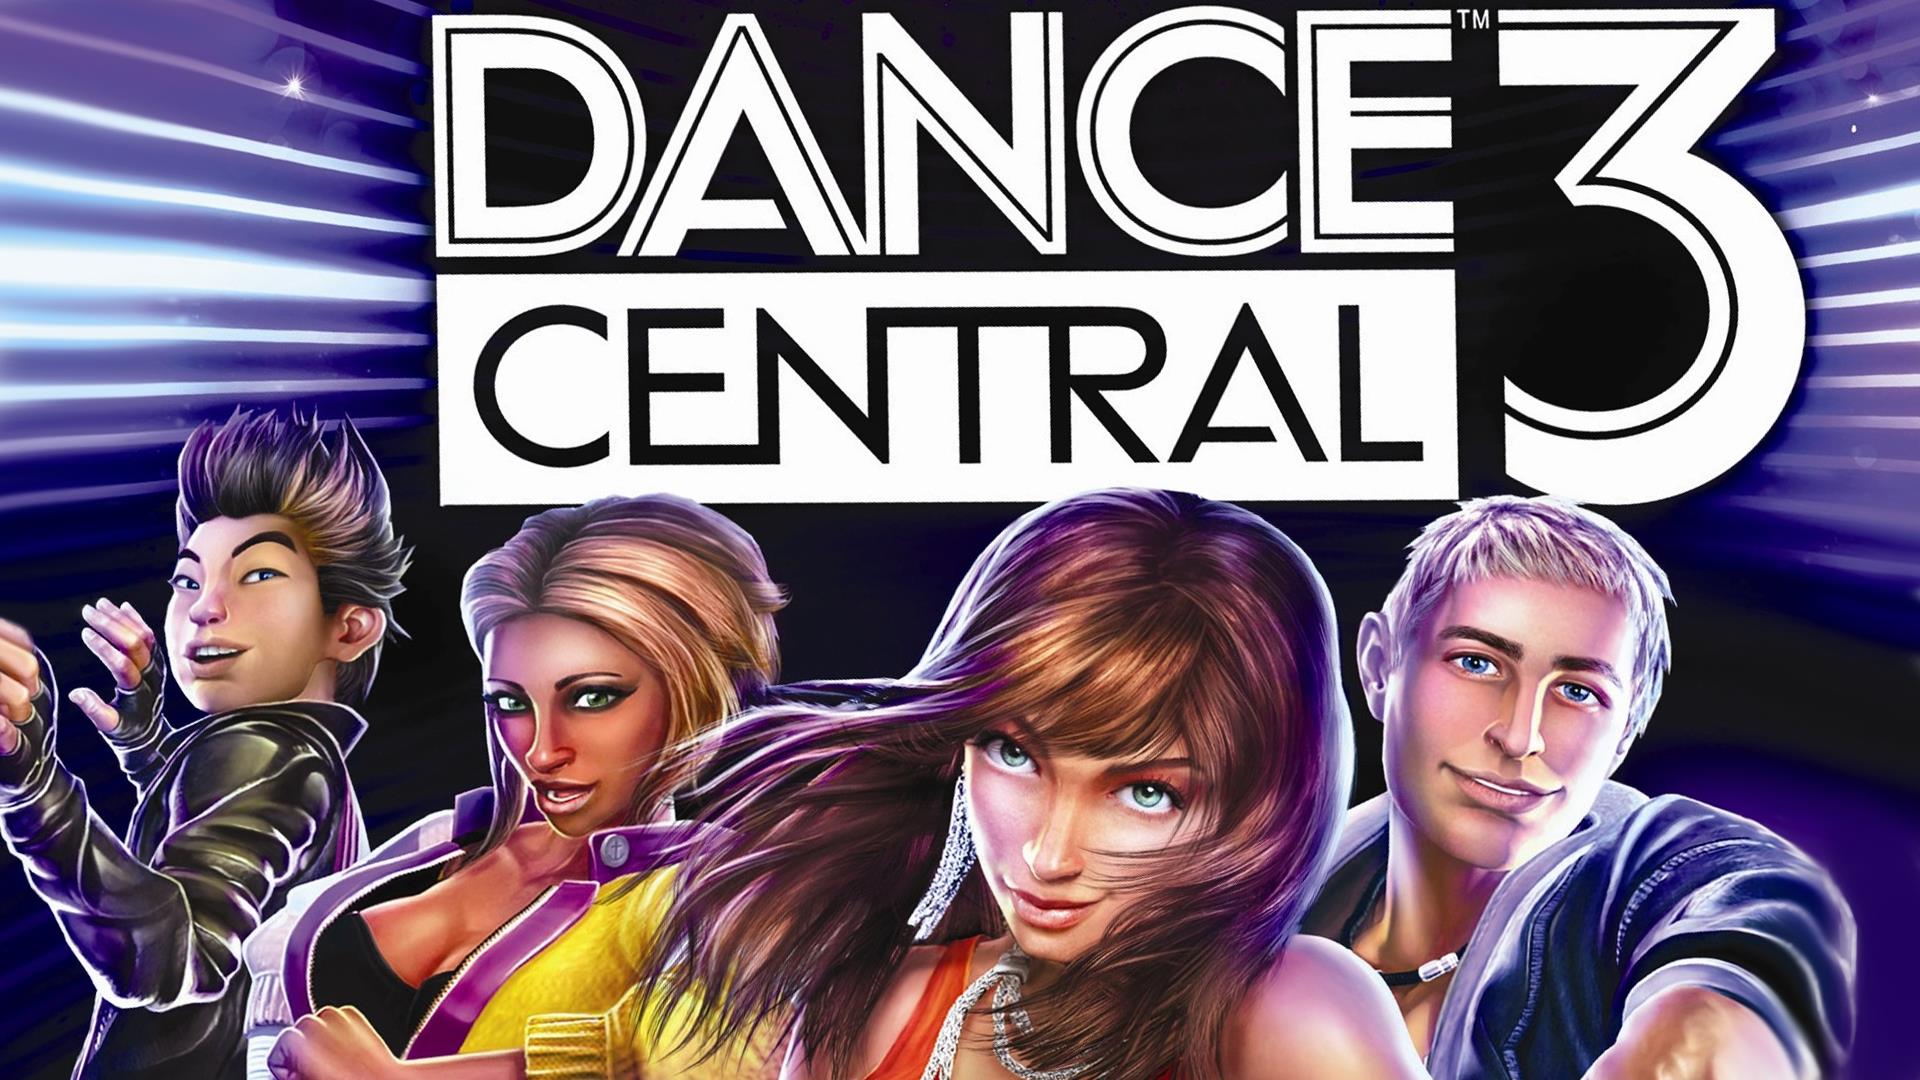 Dance Central Widescreen image